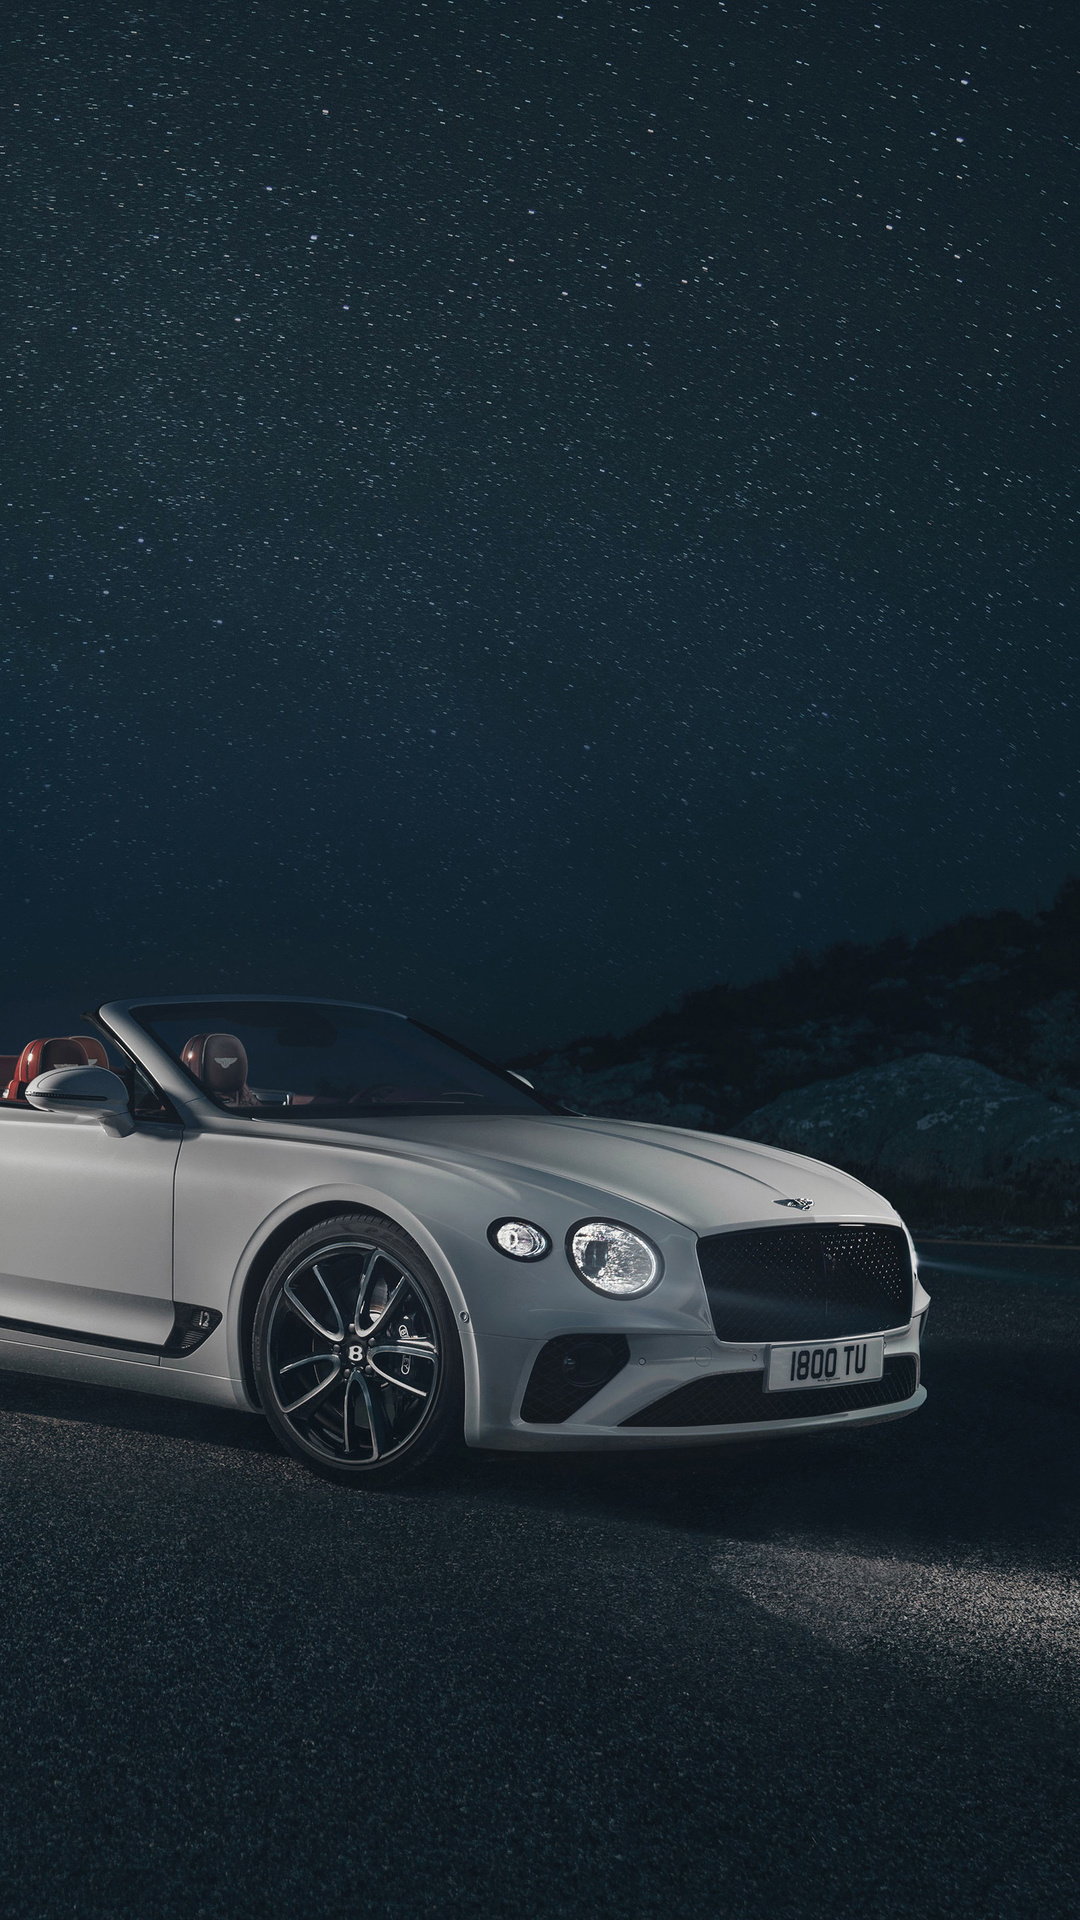 Bentley Continental GTC, iPhone wallpapers, Download luxury car, High-end cars, 1080x1920 Full HD Phone